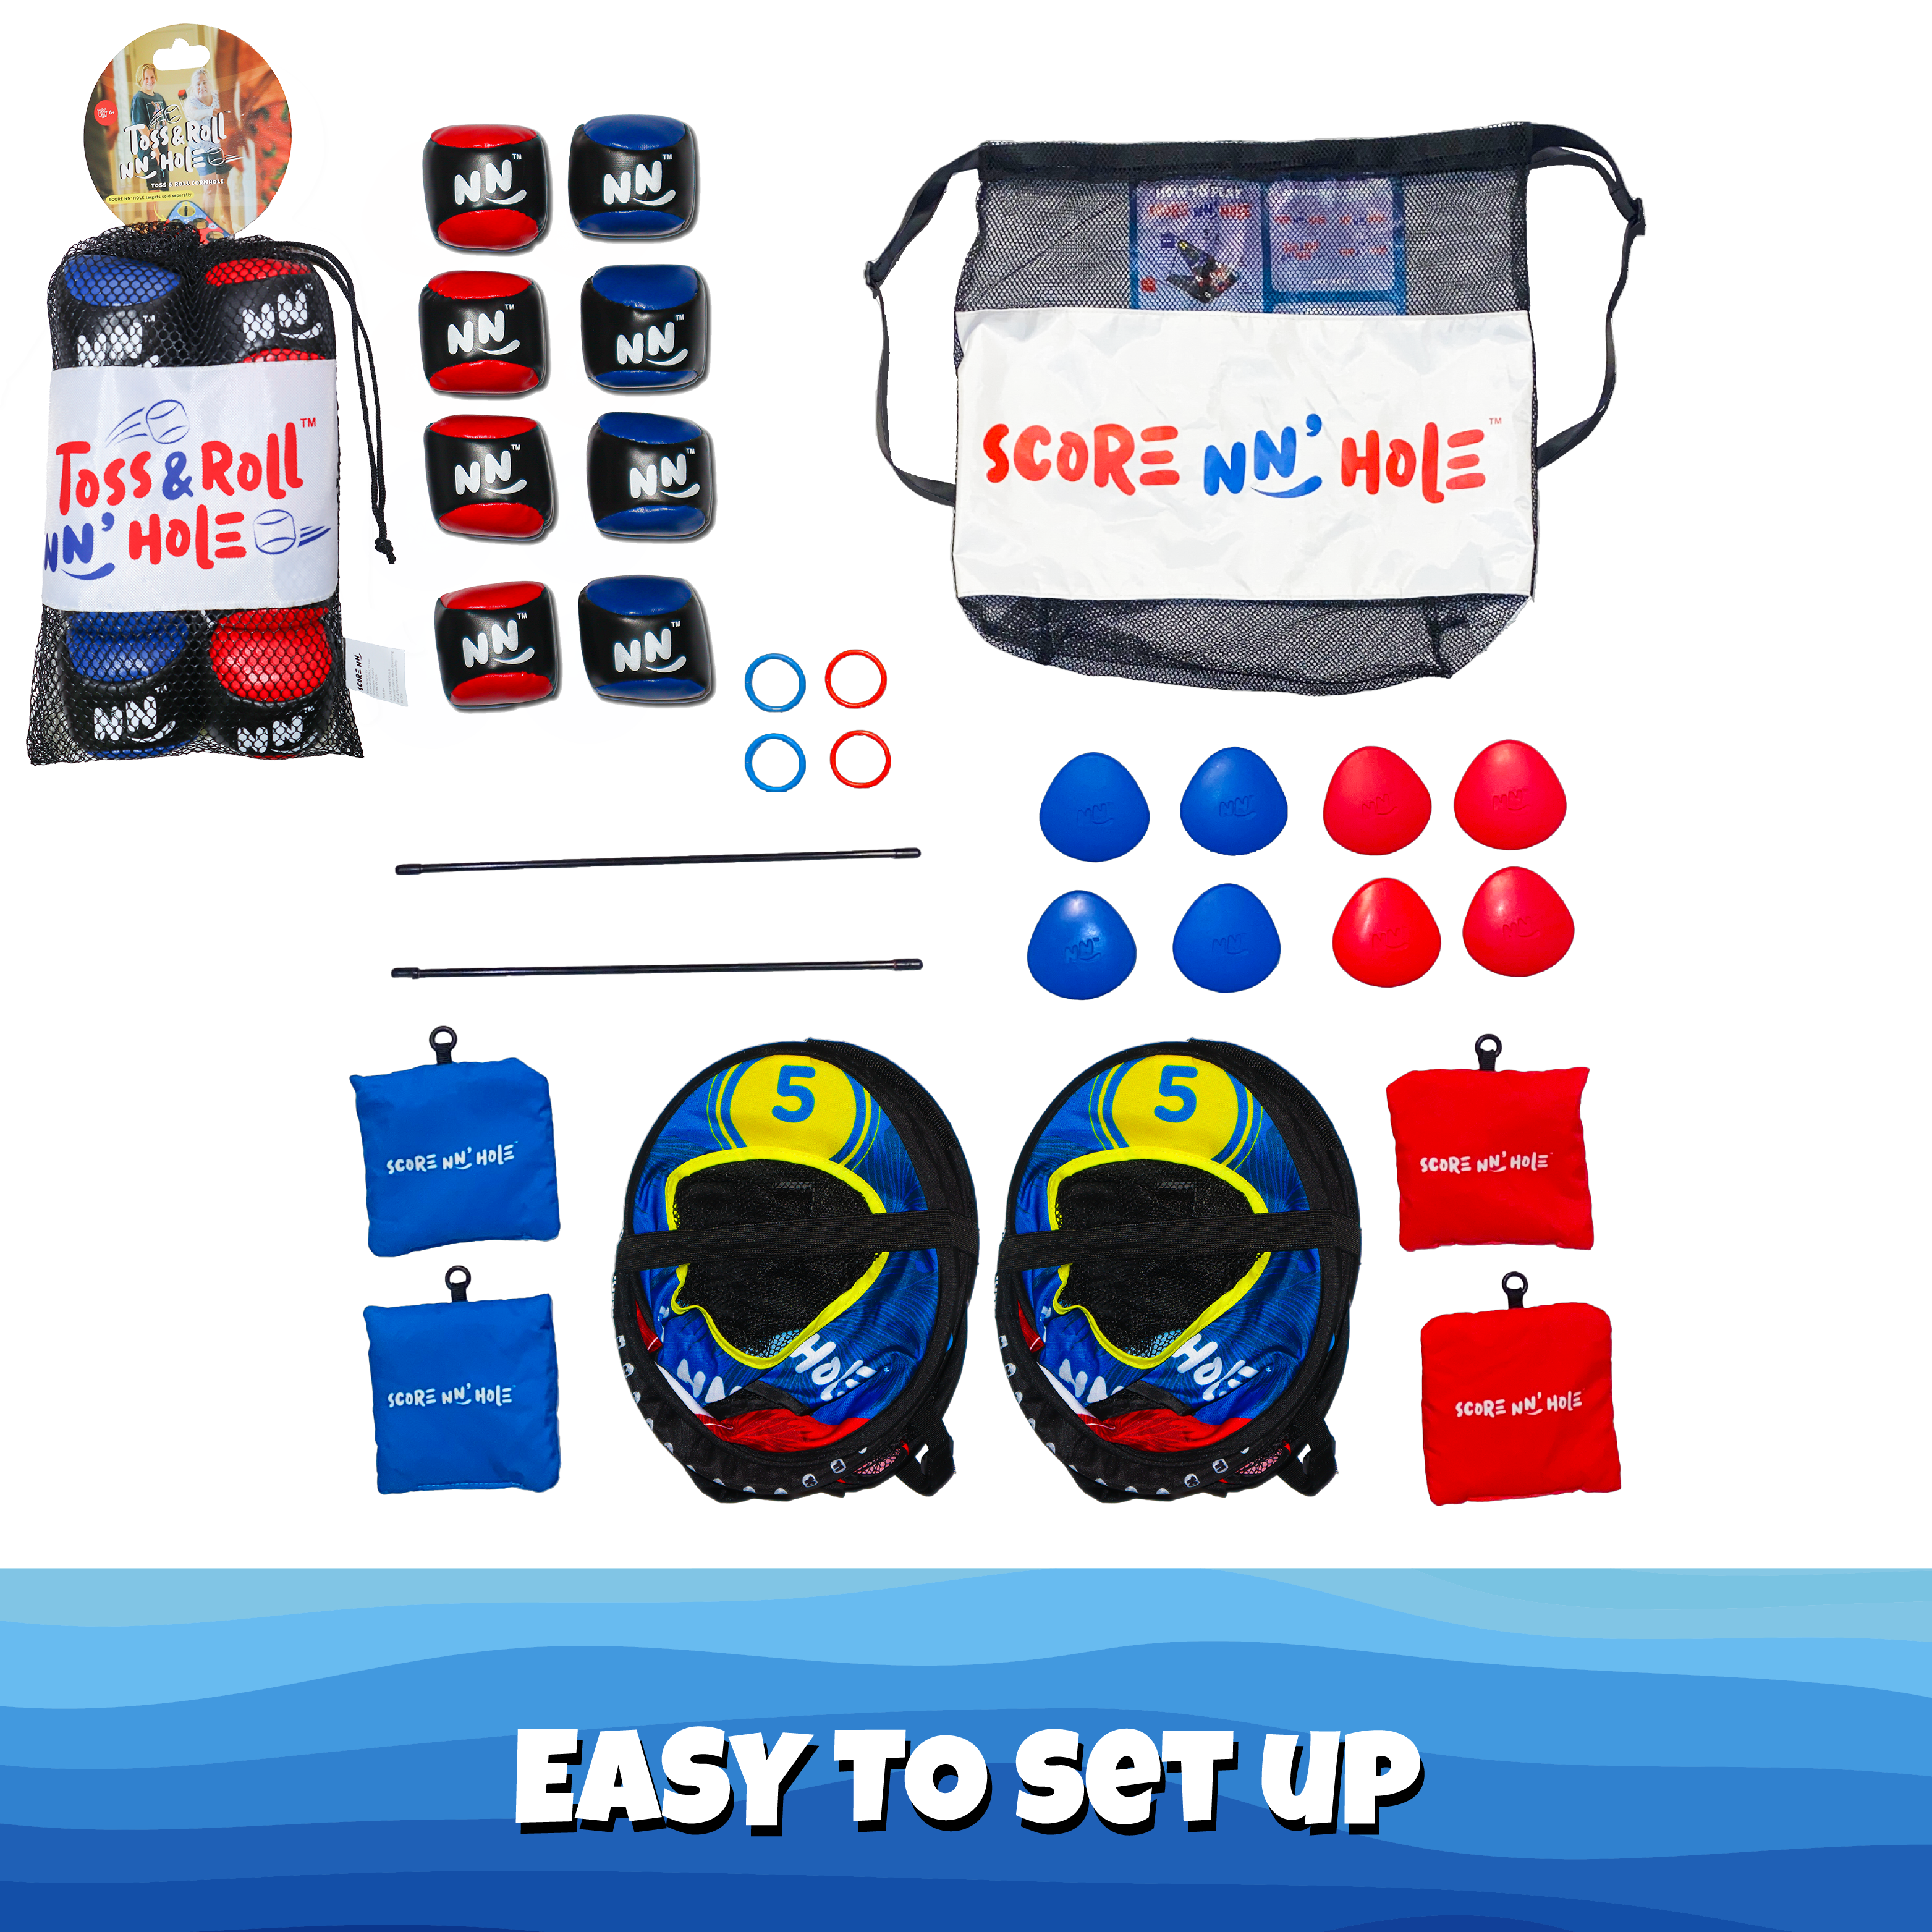 SKIP NN' HOLE + TOSS & ROLL NN' Hole | Pool and Land Game Set Bundle | Skipping Stone + Toss & Roll Cornhole Game for Pool, Land, or Lake | Great Game for All Ages